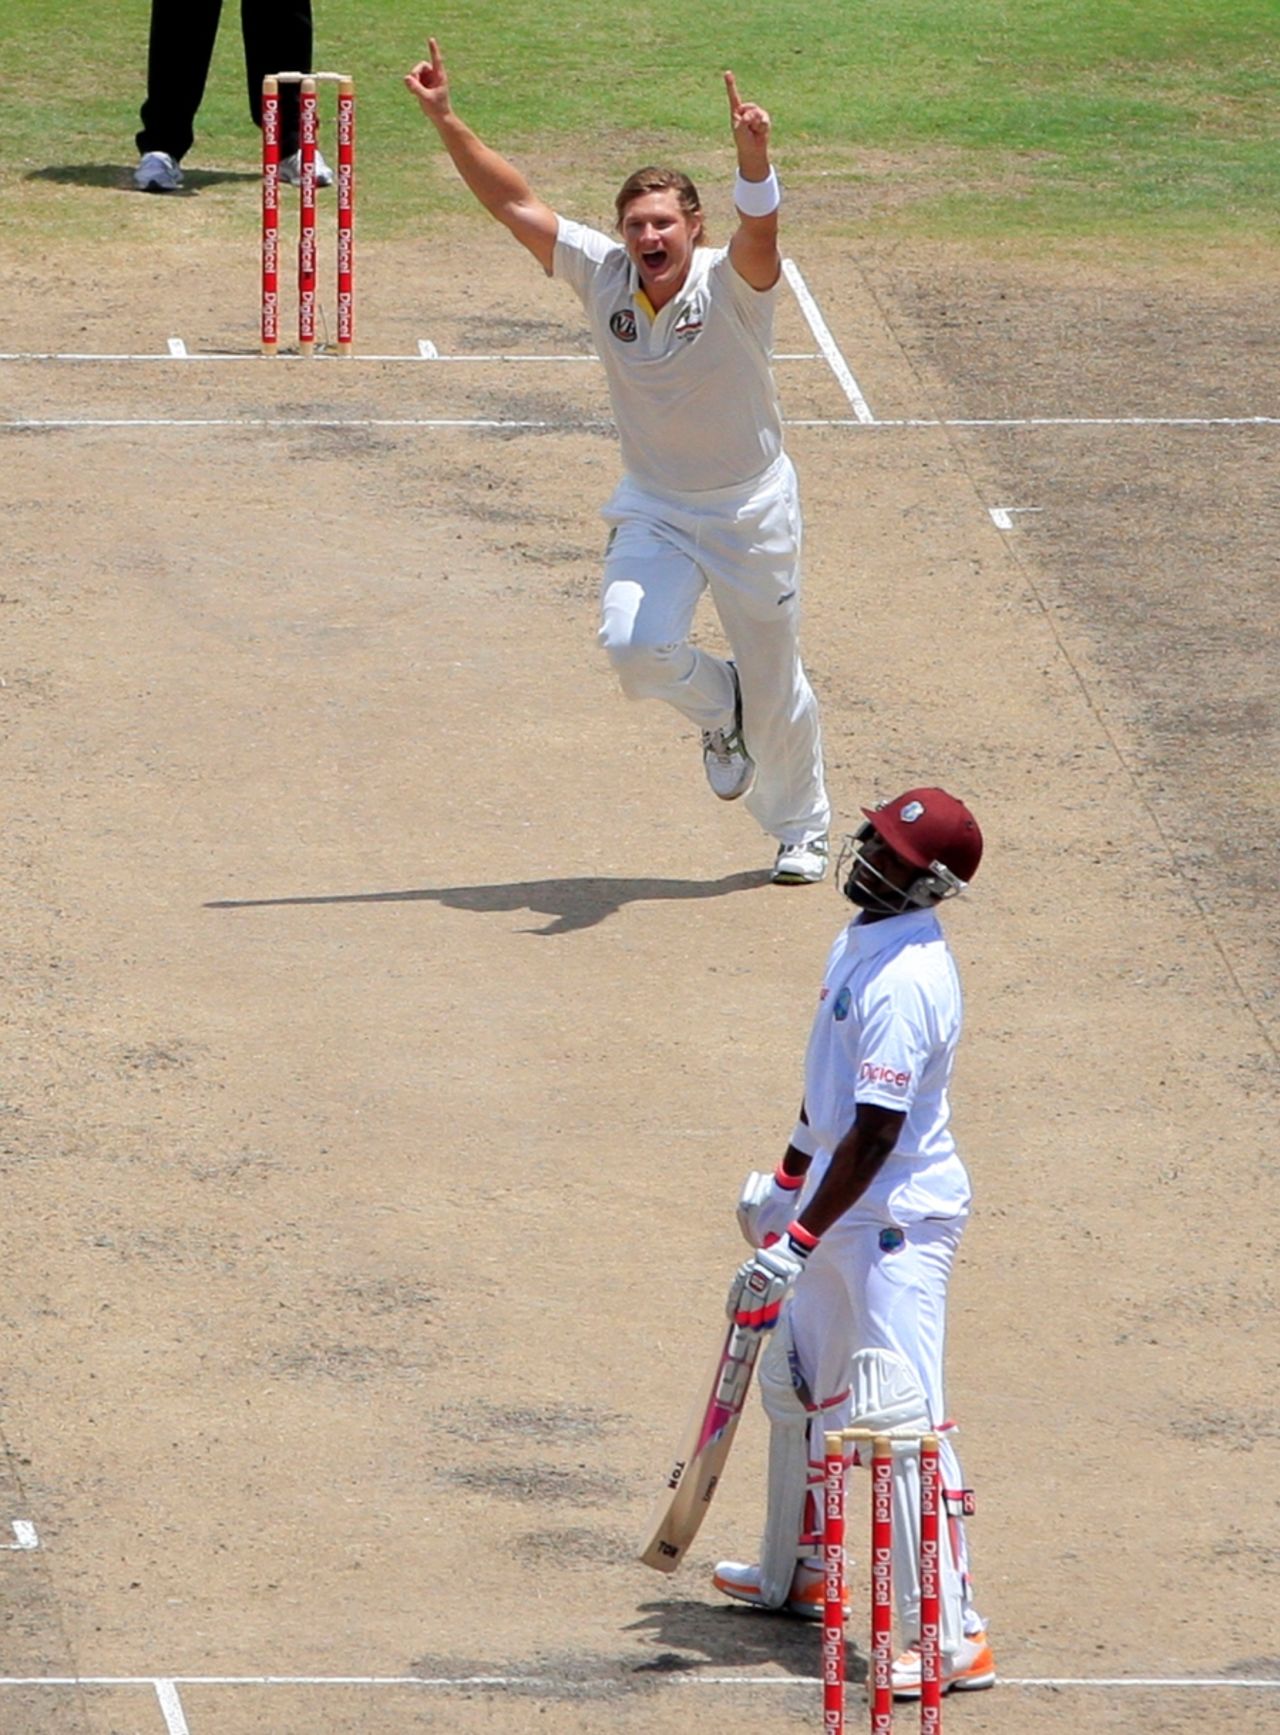 Shane Watson celebrates as Darren Bravo is caught at gully, West Indies v Australia, 1st Test, Barbados, 2nd day, April 8, 2012